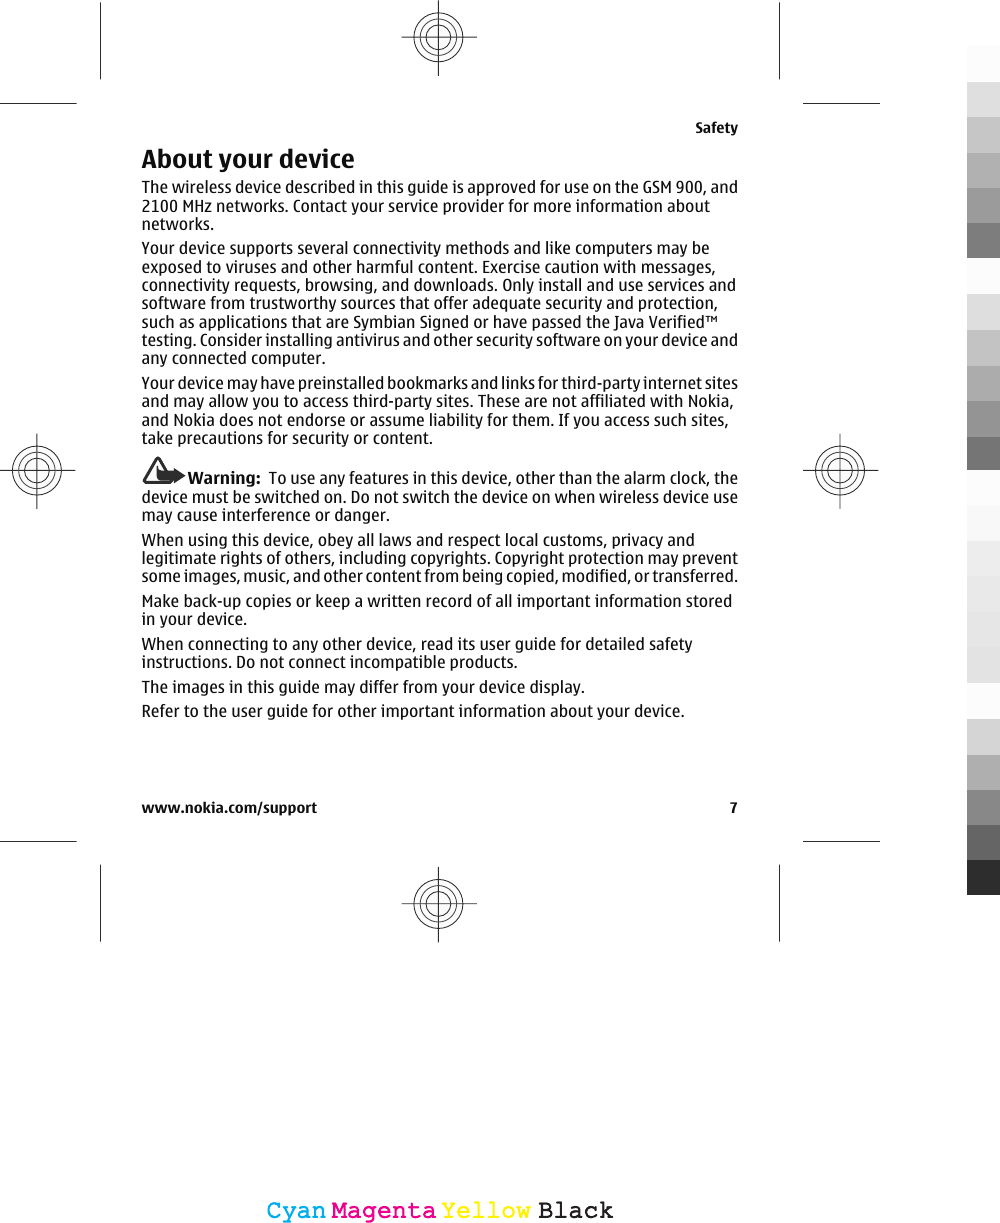 About your deviceThe wireless device described in this guide is approved for use on the GSM 900, and2100 MHz networks. Contact your service provider for more information aboutnetworks.Your device supports several connectivity methods and like computers may beexposed to viruses and other harmful content. Exercise caution with messages,connectivity requests, browsing, and downloads. Only install and use services andsoftware from trustworthy sources that offer adequate security and protection,such as applications that are Symbian Signed or have passed the Java Verified™testing. Consider installing antivirus and other security software on your device andany connected computer.Your device may have preinstalled bookmarks and links for third-party internet sitesand may allow you to access third-party sites. These are not affiliated with Nokia,and Nokia does not endorse or assume liability for them. If you access such sites,take precautions for security or content.Warning:  To use any features in this device, other than the alarm clock, thedevice must be switched on. Do not switch the device on when wireless device usemay cause interference or danger.When using this device, obey all laws and respect local customs, privacy andlegitimate rights of others, including copyrights. Copyright protection may preventsome images, music, and other content from being copied, modified, or transferred.Make back-up copies or keep a written record of all important information storedin your device.When connecting to any other device, read its user guide for detailed safetyinstructions. Do not connect incompatible products.The images in this guide may differ from your device display.Refer to the user guide for other important information about your device.Safetywww.nokia.com/support 7CyanCyanMagentaMagentaYellowYellowBlackBlack